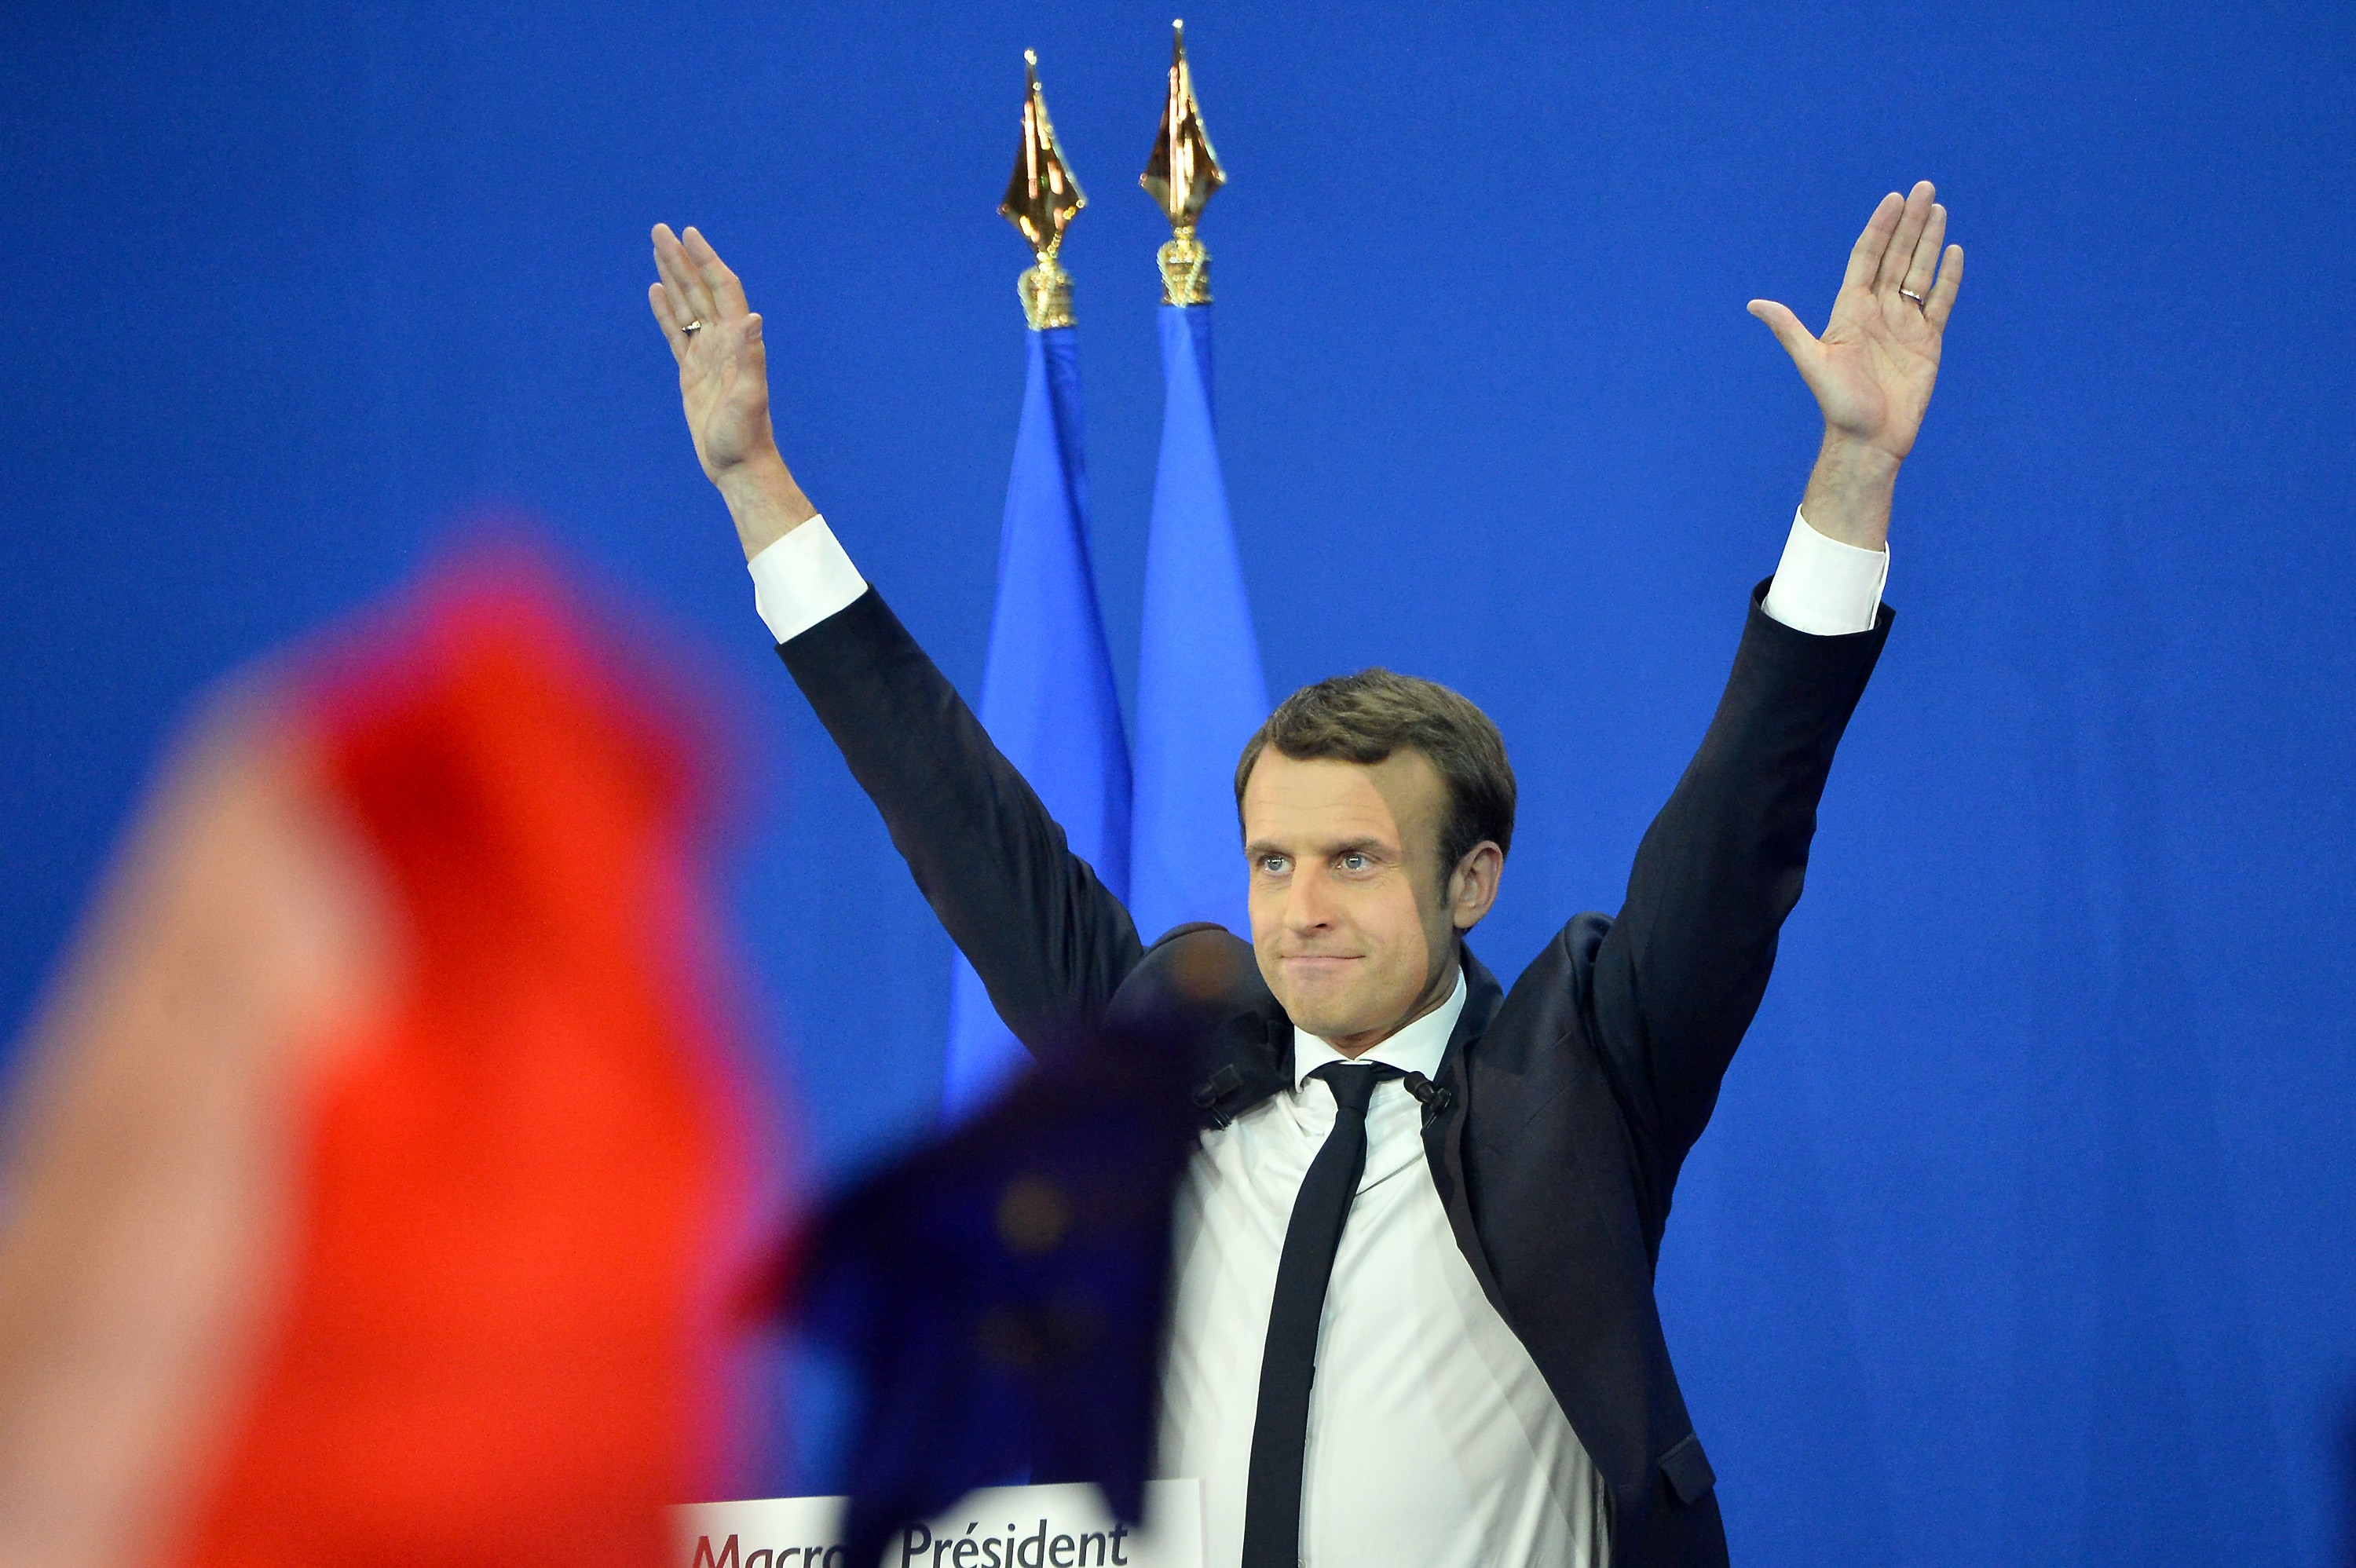 Emmanuel Macron pictured at a rally after his success in the first round of the presidential vote last month. Photo: Xinhua